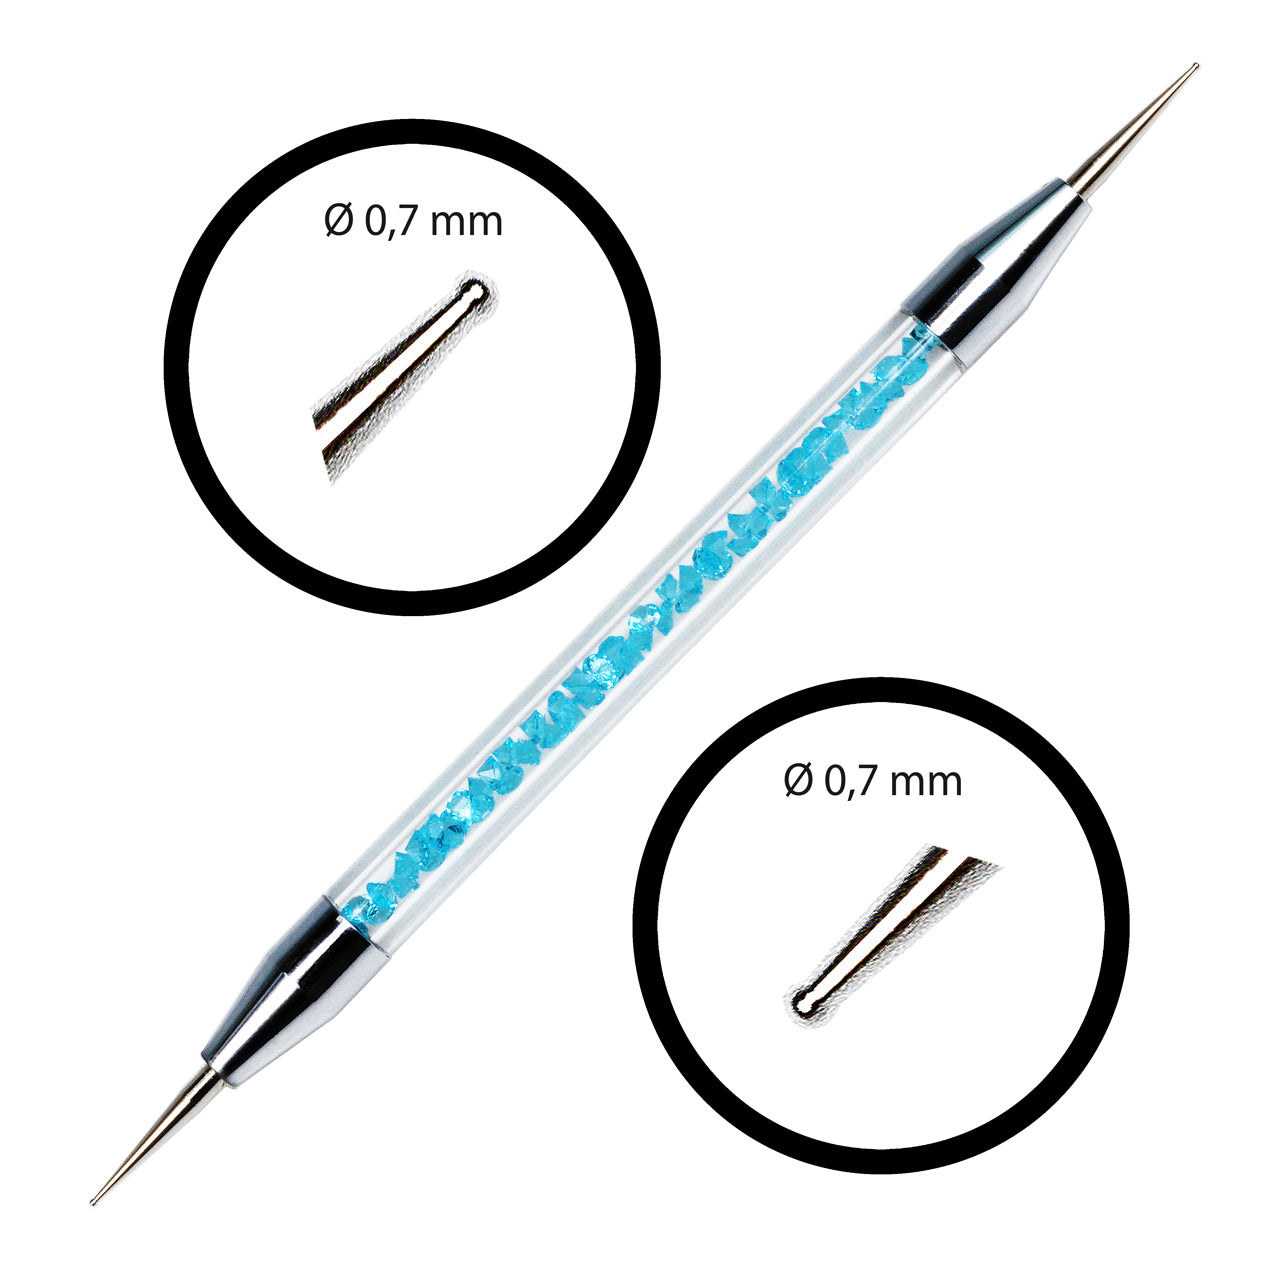 Nail Art Dotting Tool Deluxe 0,7mm